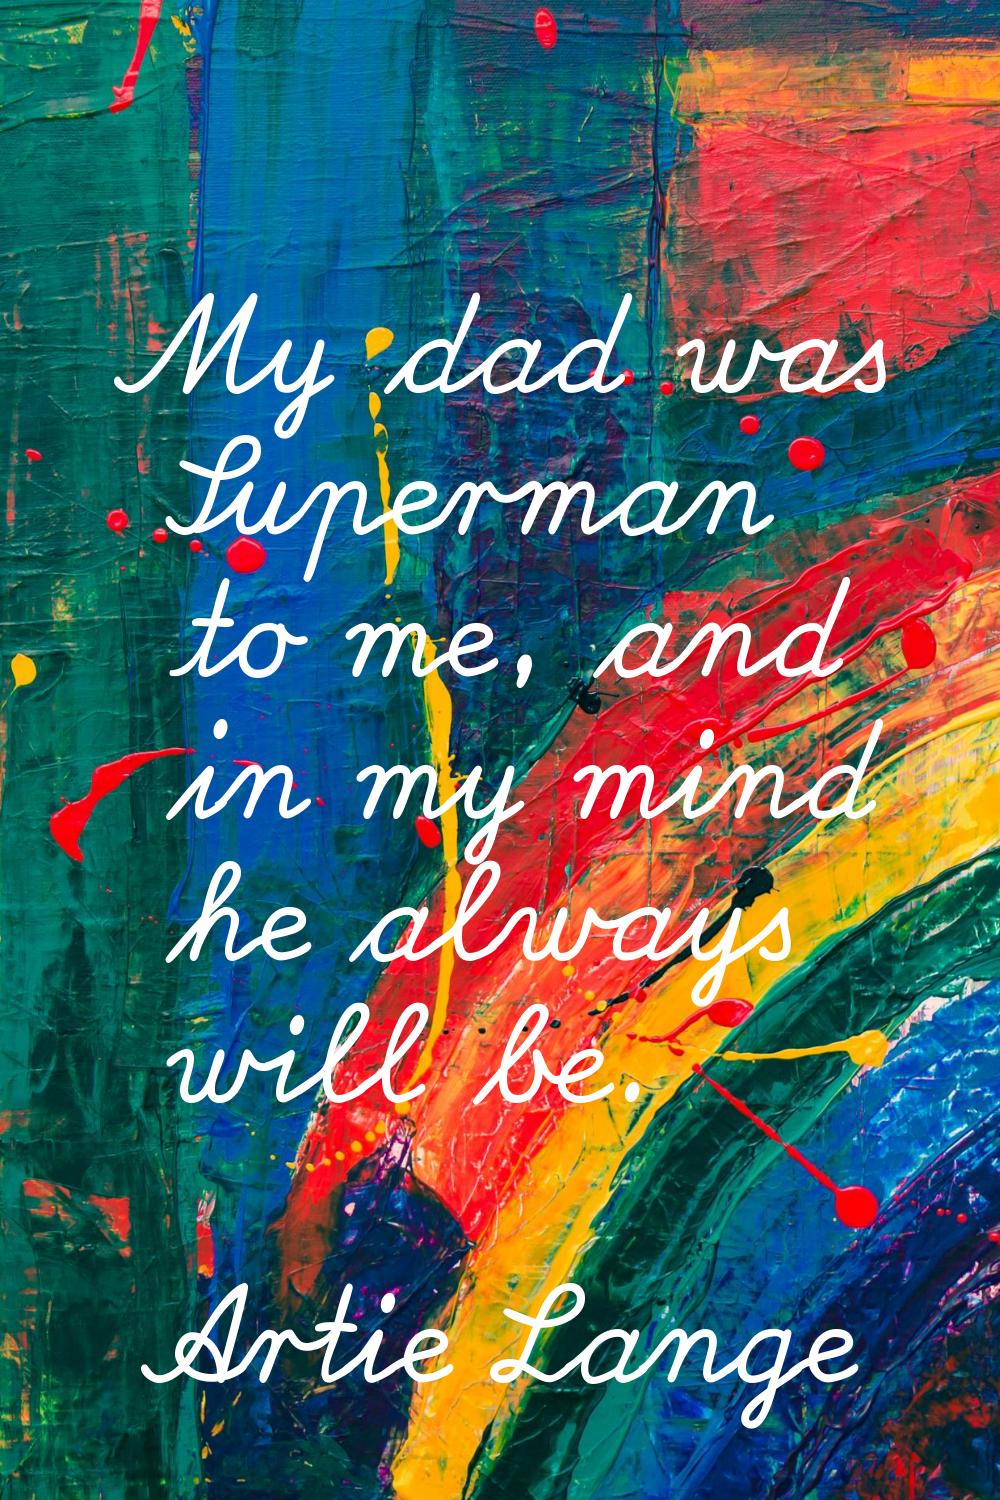 My dad was Superman to me, and in my mind he always will be.